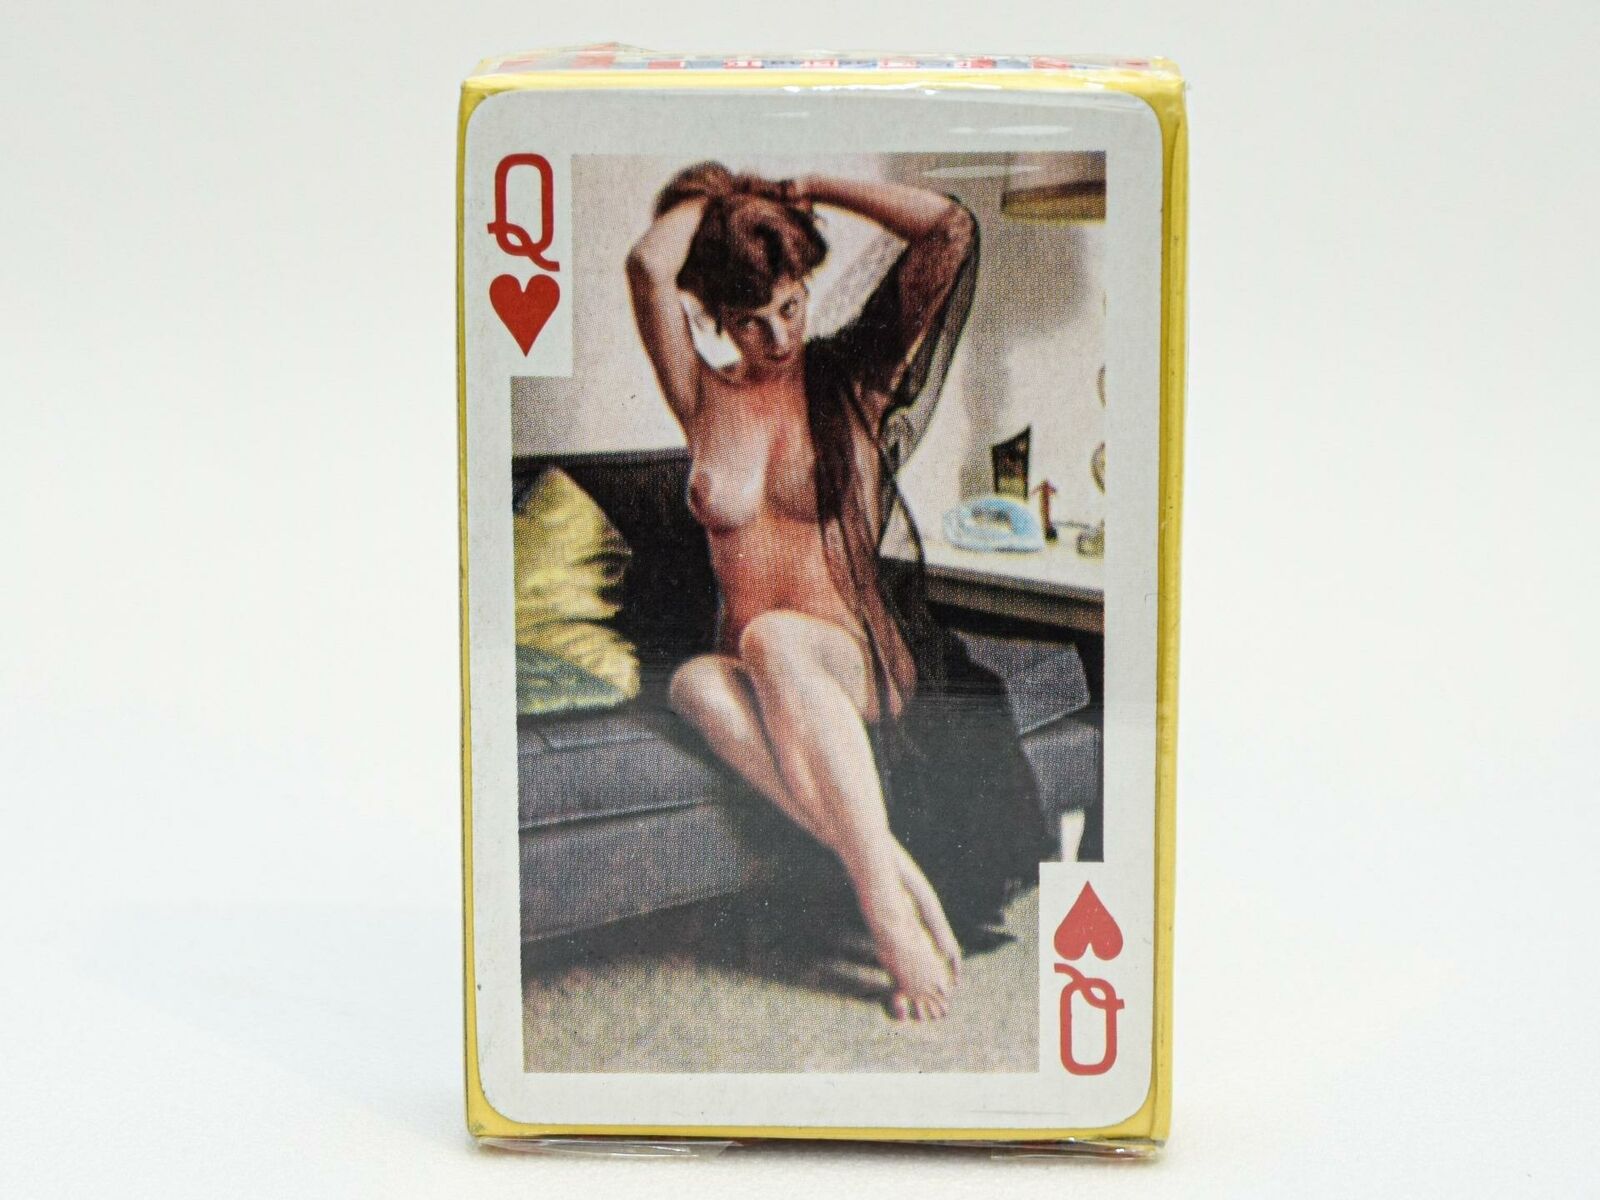 abhimanyu gautam recommends nude women playing cards pic